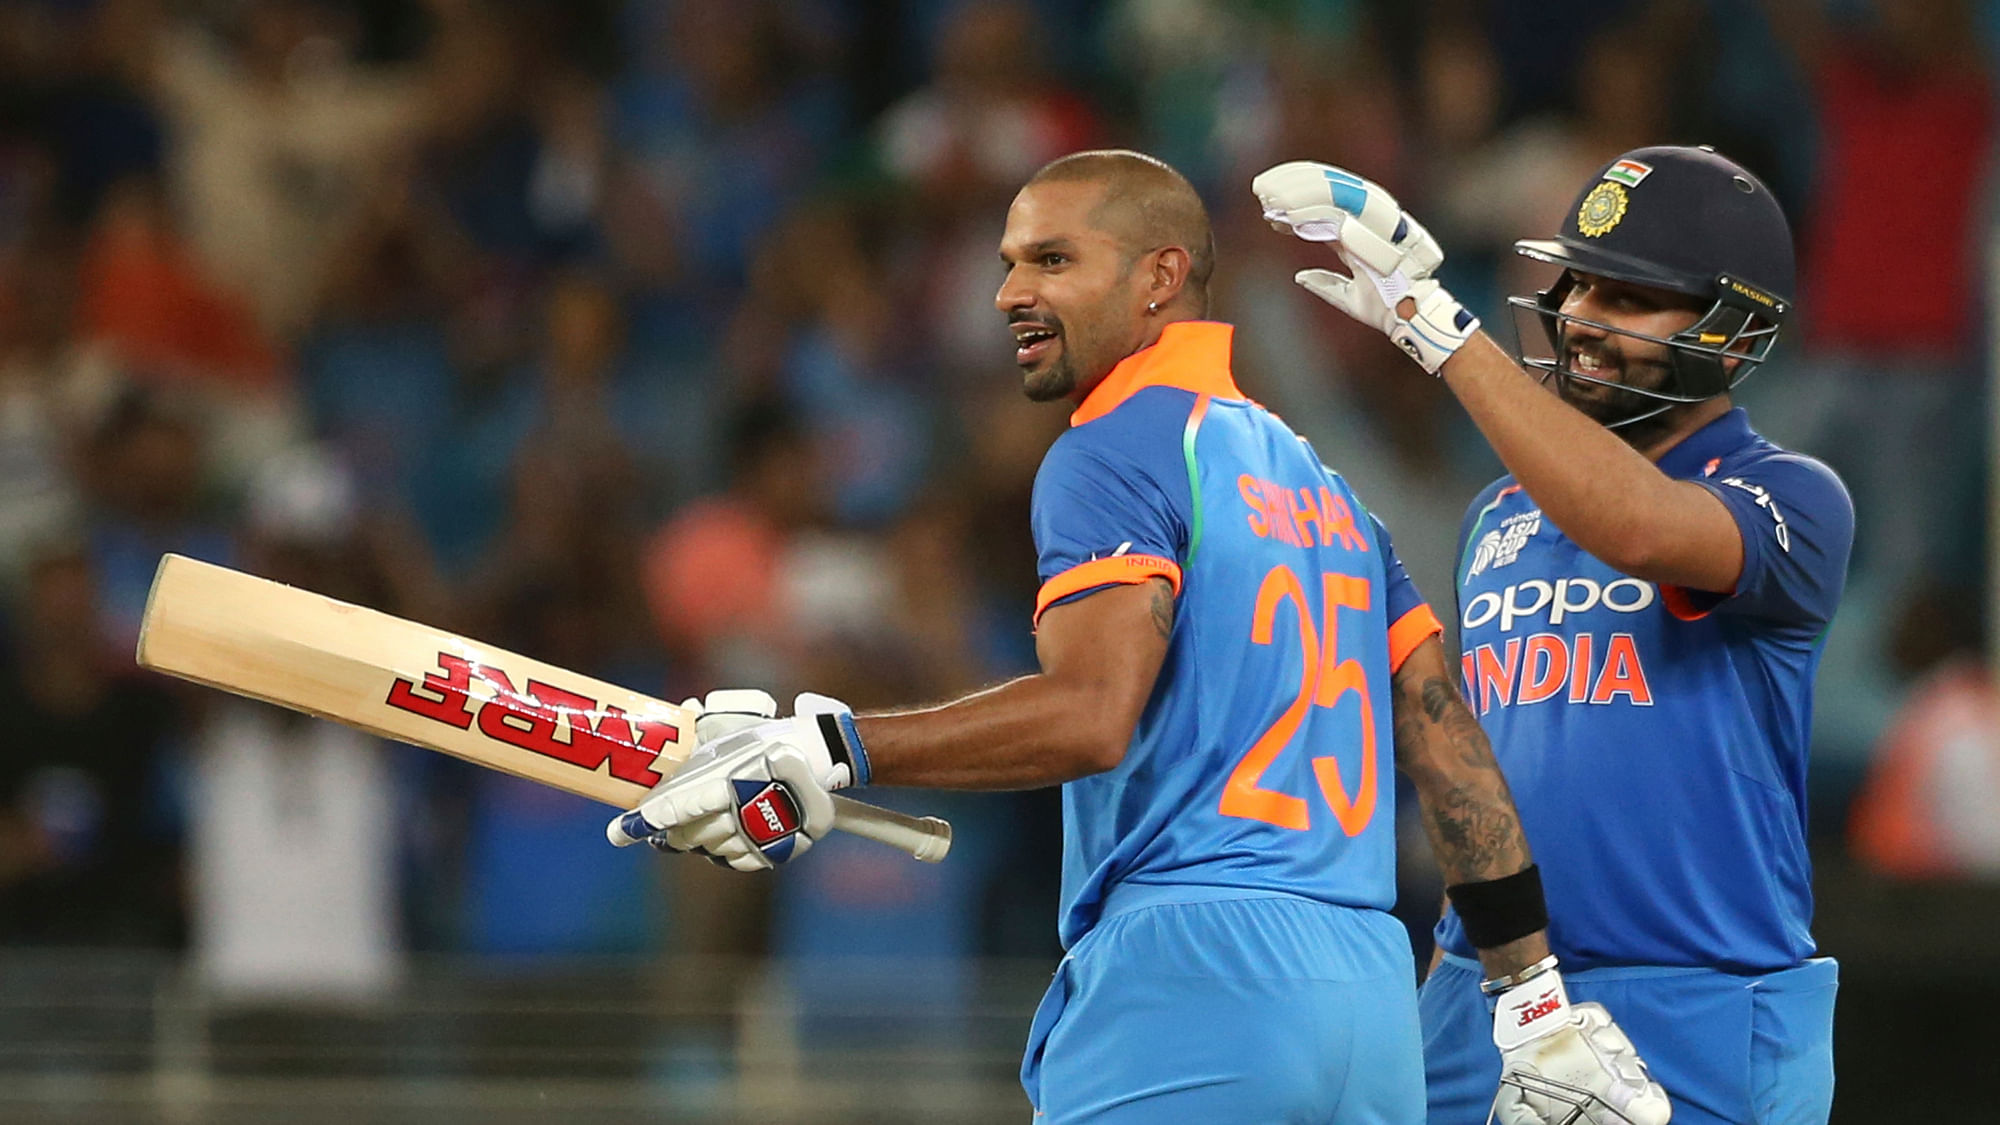 Shikhar Dhawan and Rohit Sharma collaborated to score 201 runs for the first wicket, India’s highest opening stand against Pakistan.